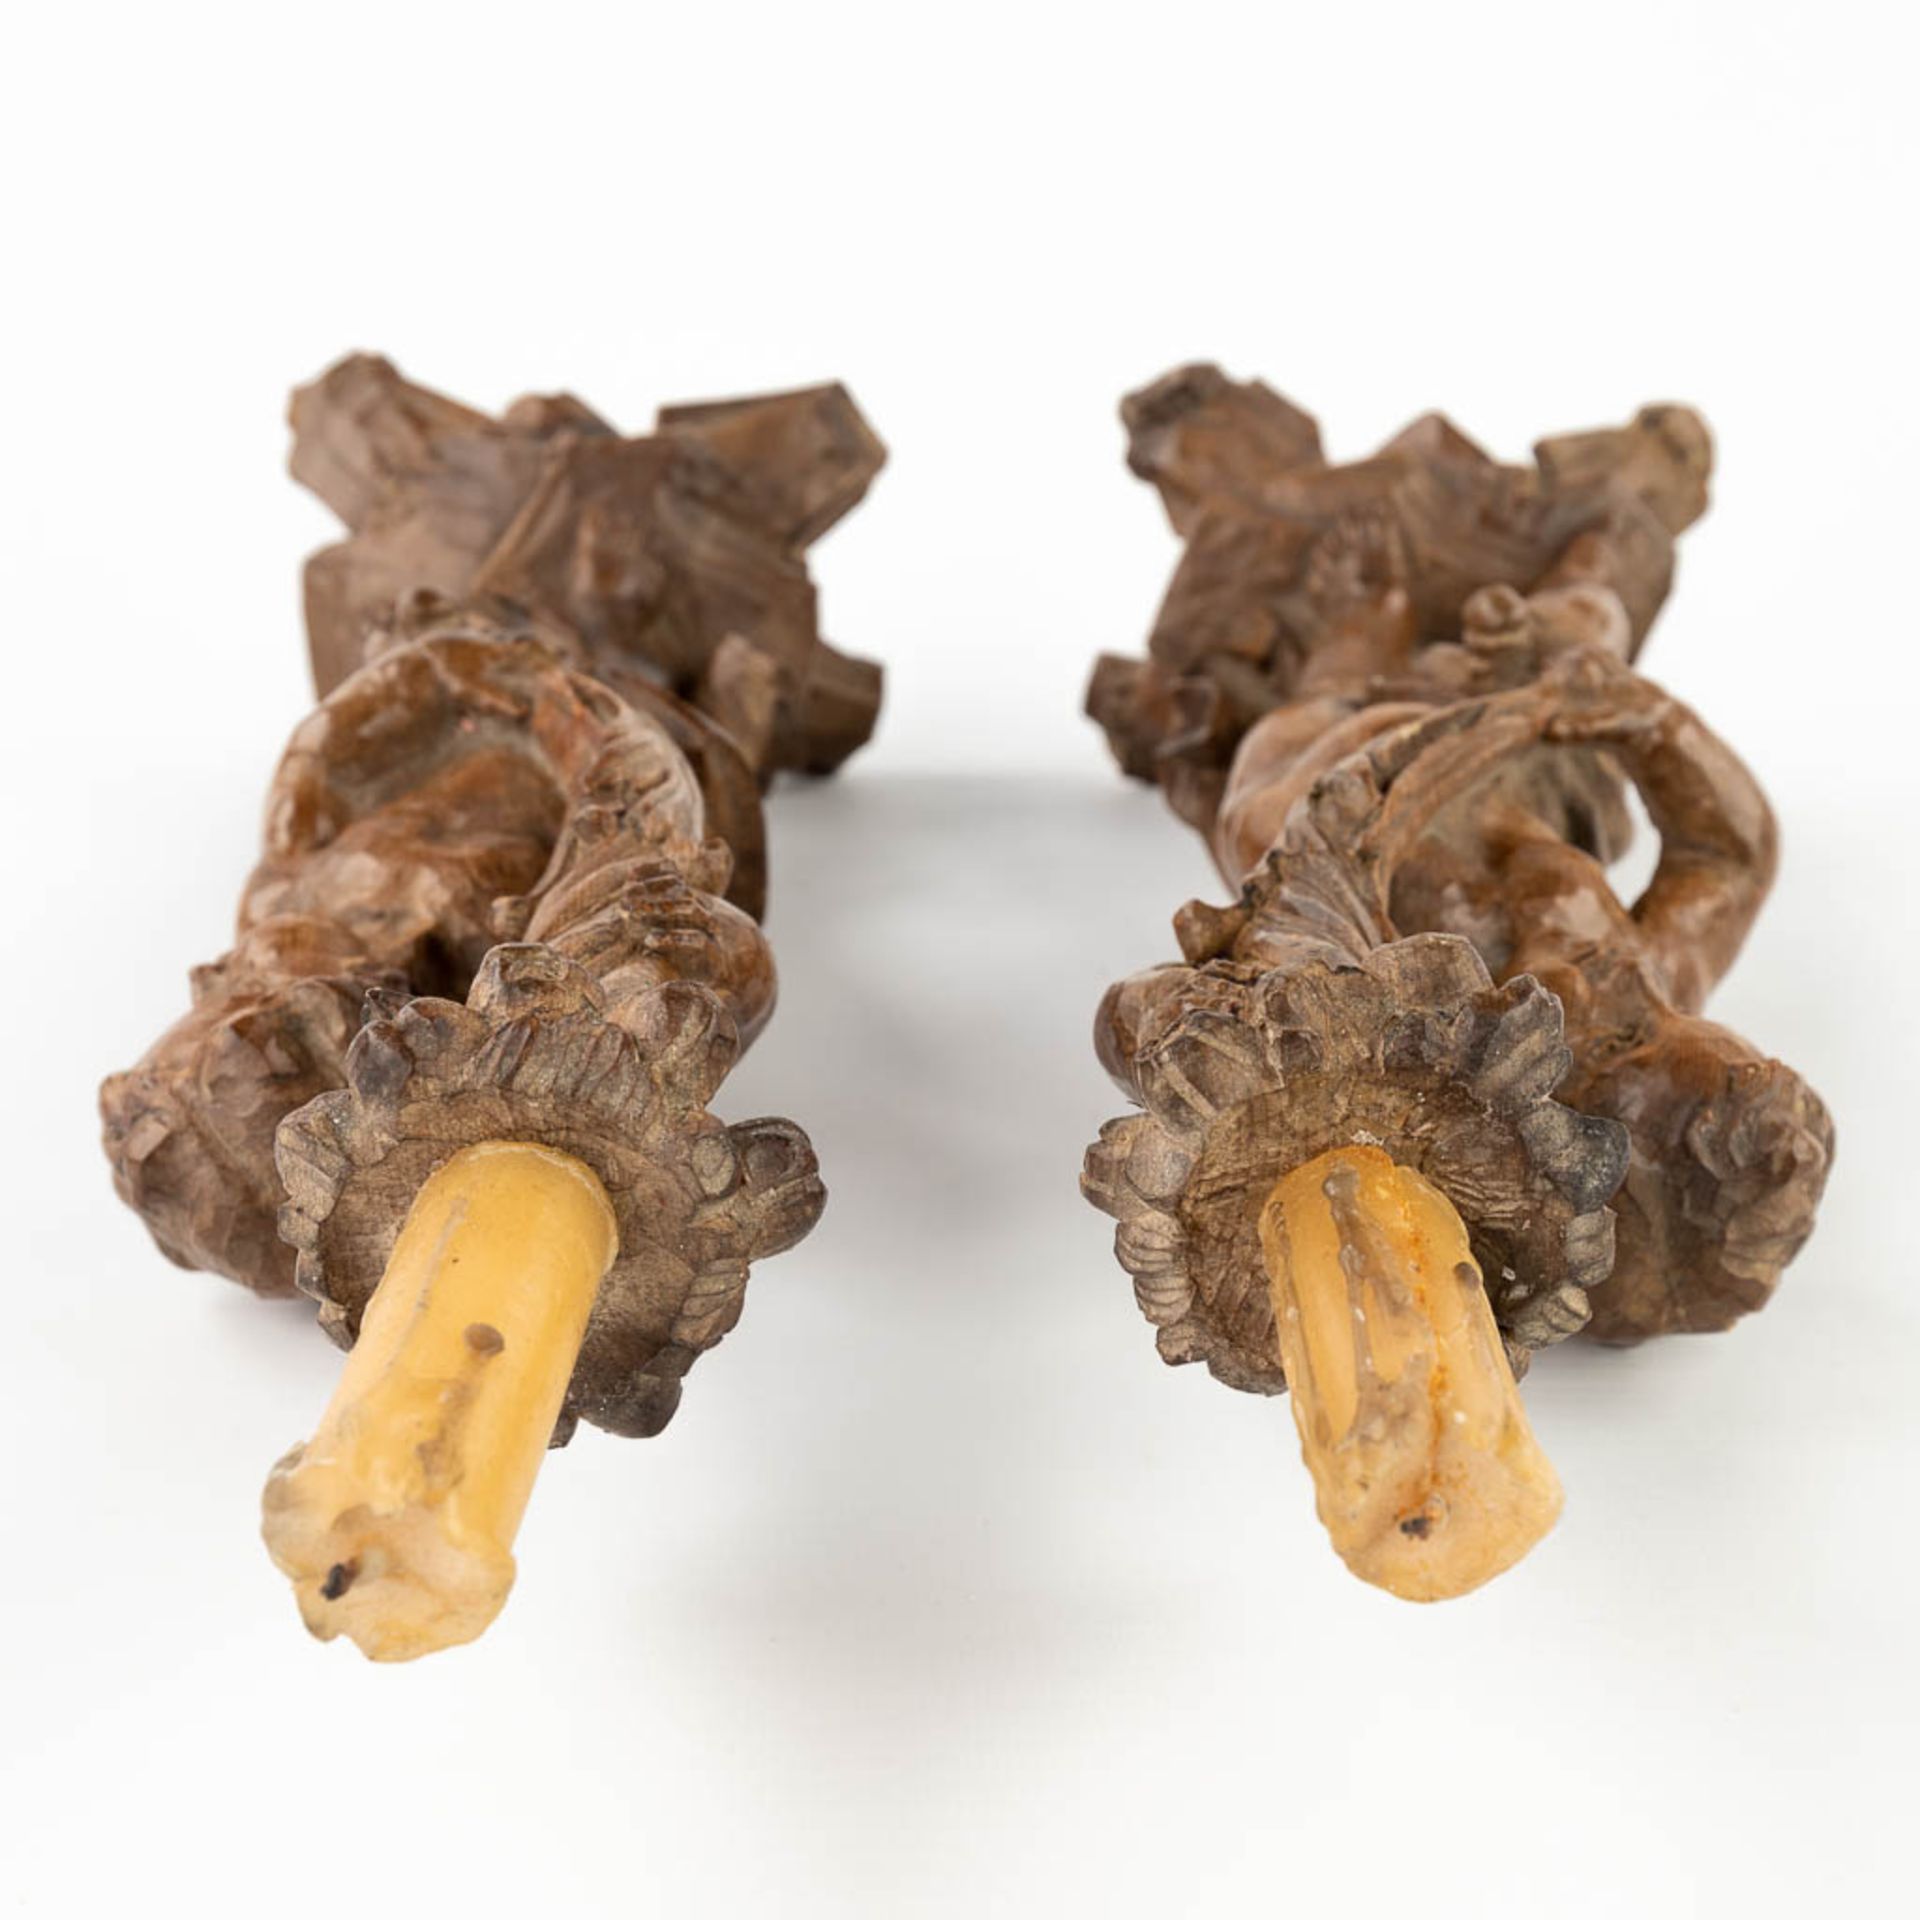 A pair of wood-sculptured candle holders, with putti. 19th C. (L:9 x W:12 x H:34 cm) - Image 12 of 12